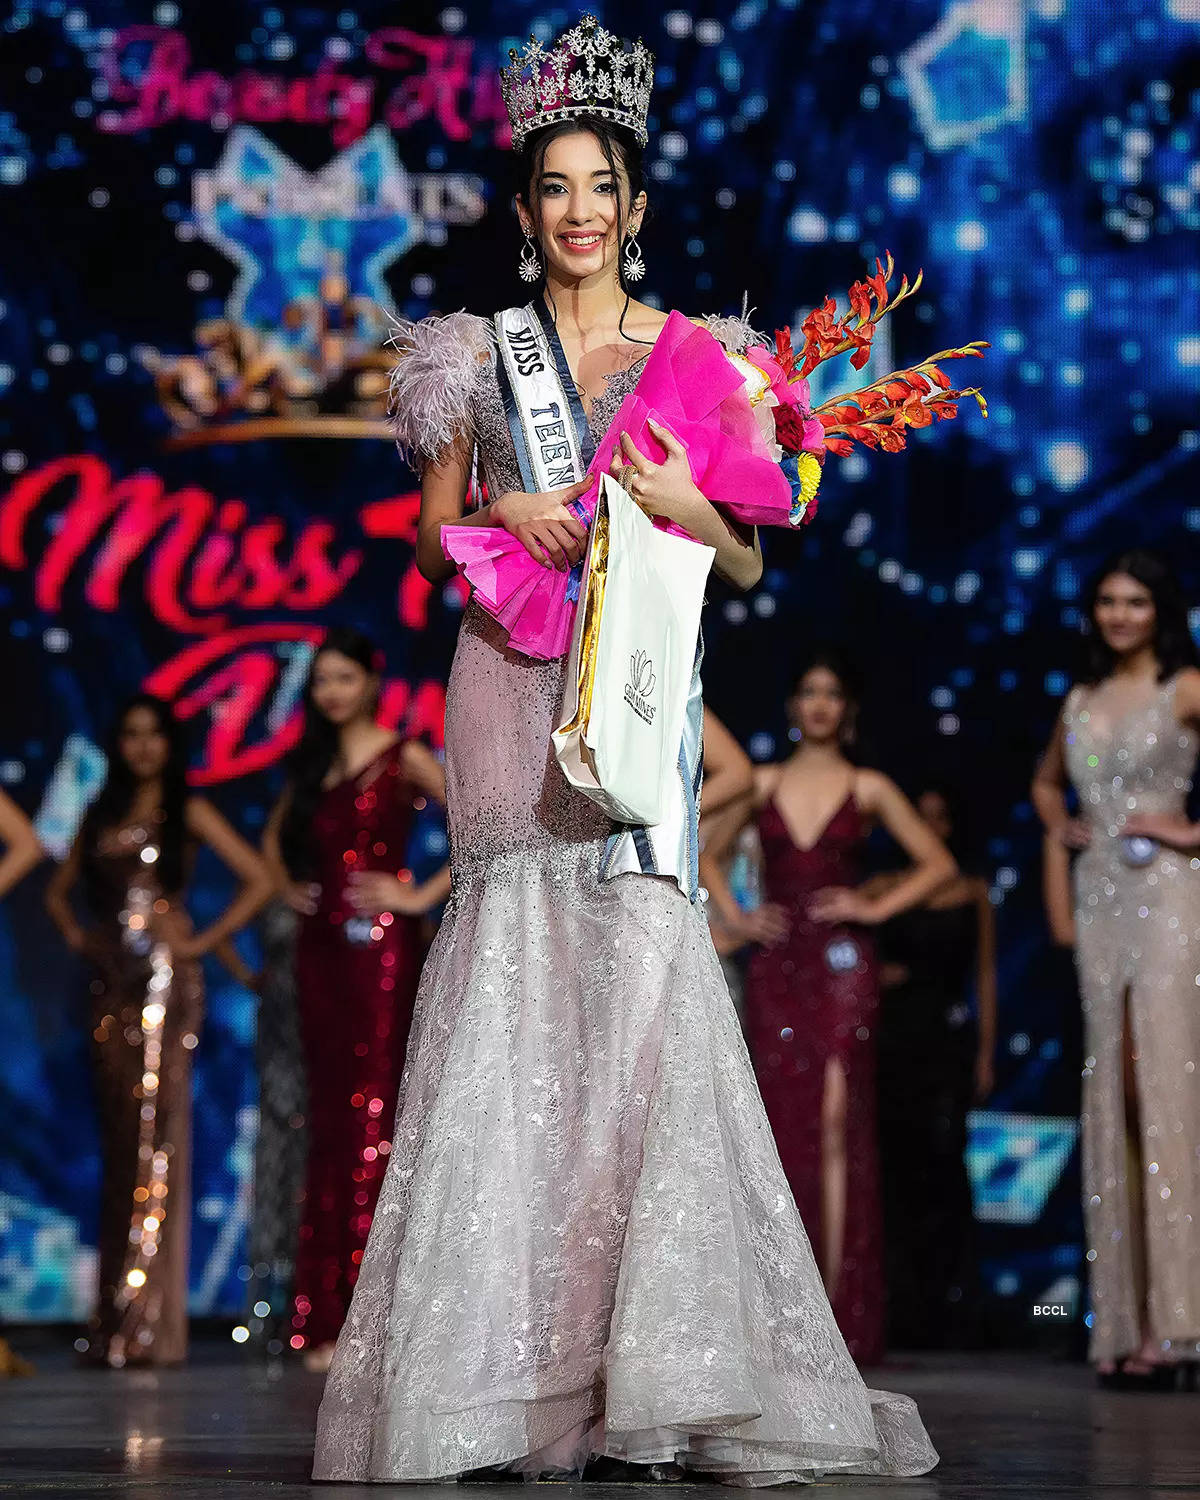 Pictures of Rabia Hora crowned Miss Teen Earth India at Miss Teen Diva